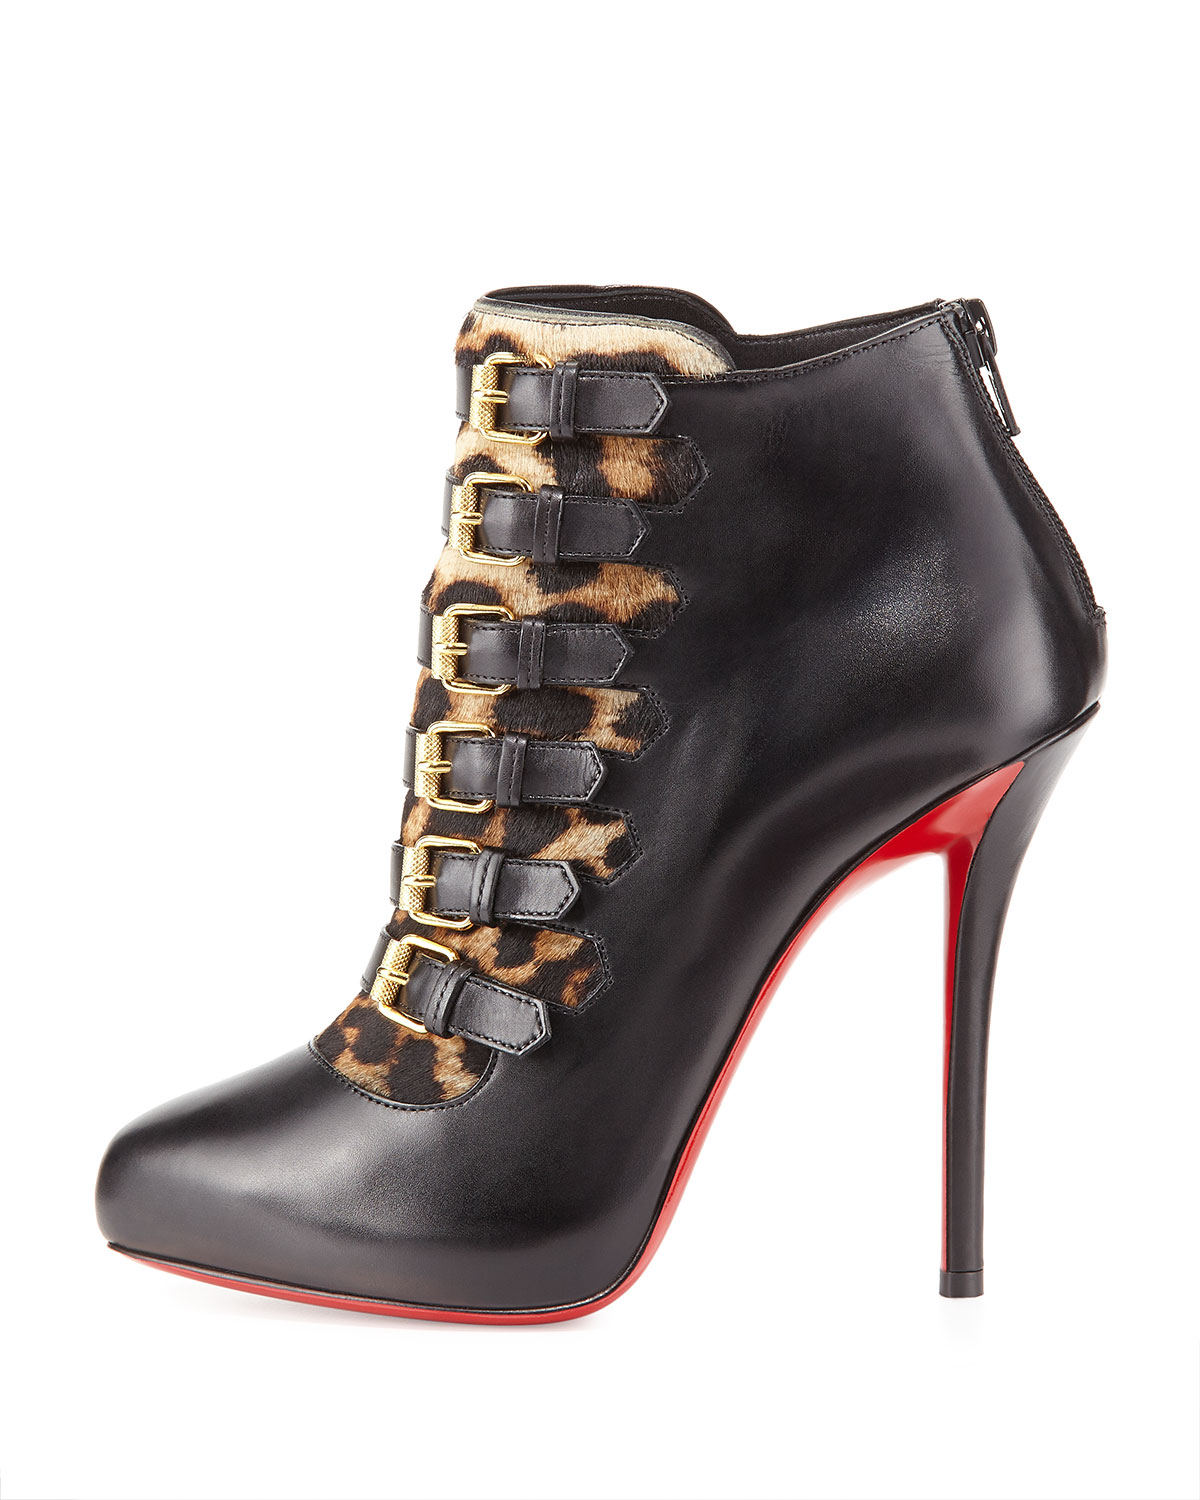 Christian louboutin Leopard-Print Buckled Red Sole Bootie in ...